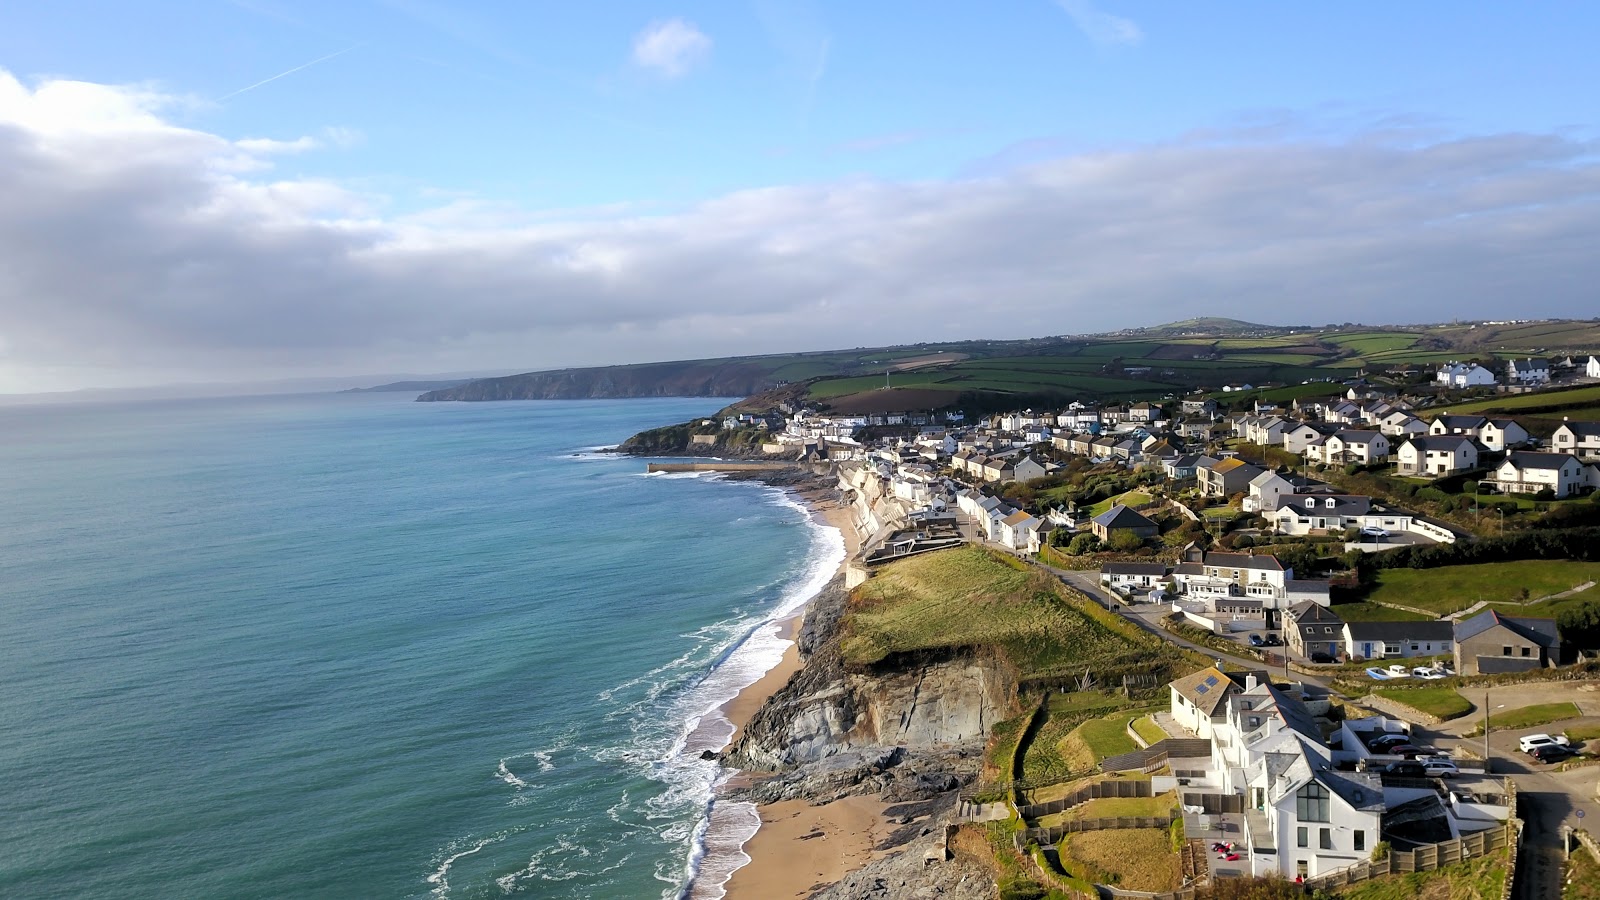 Photo of Porthleven beach - popular place among relax connoisseurs